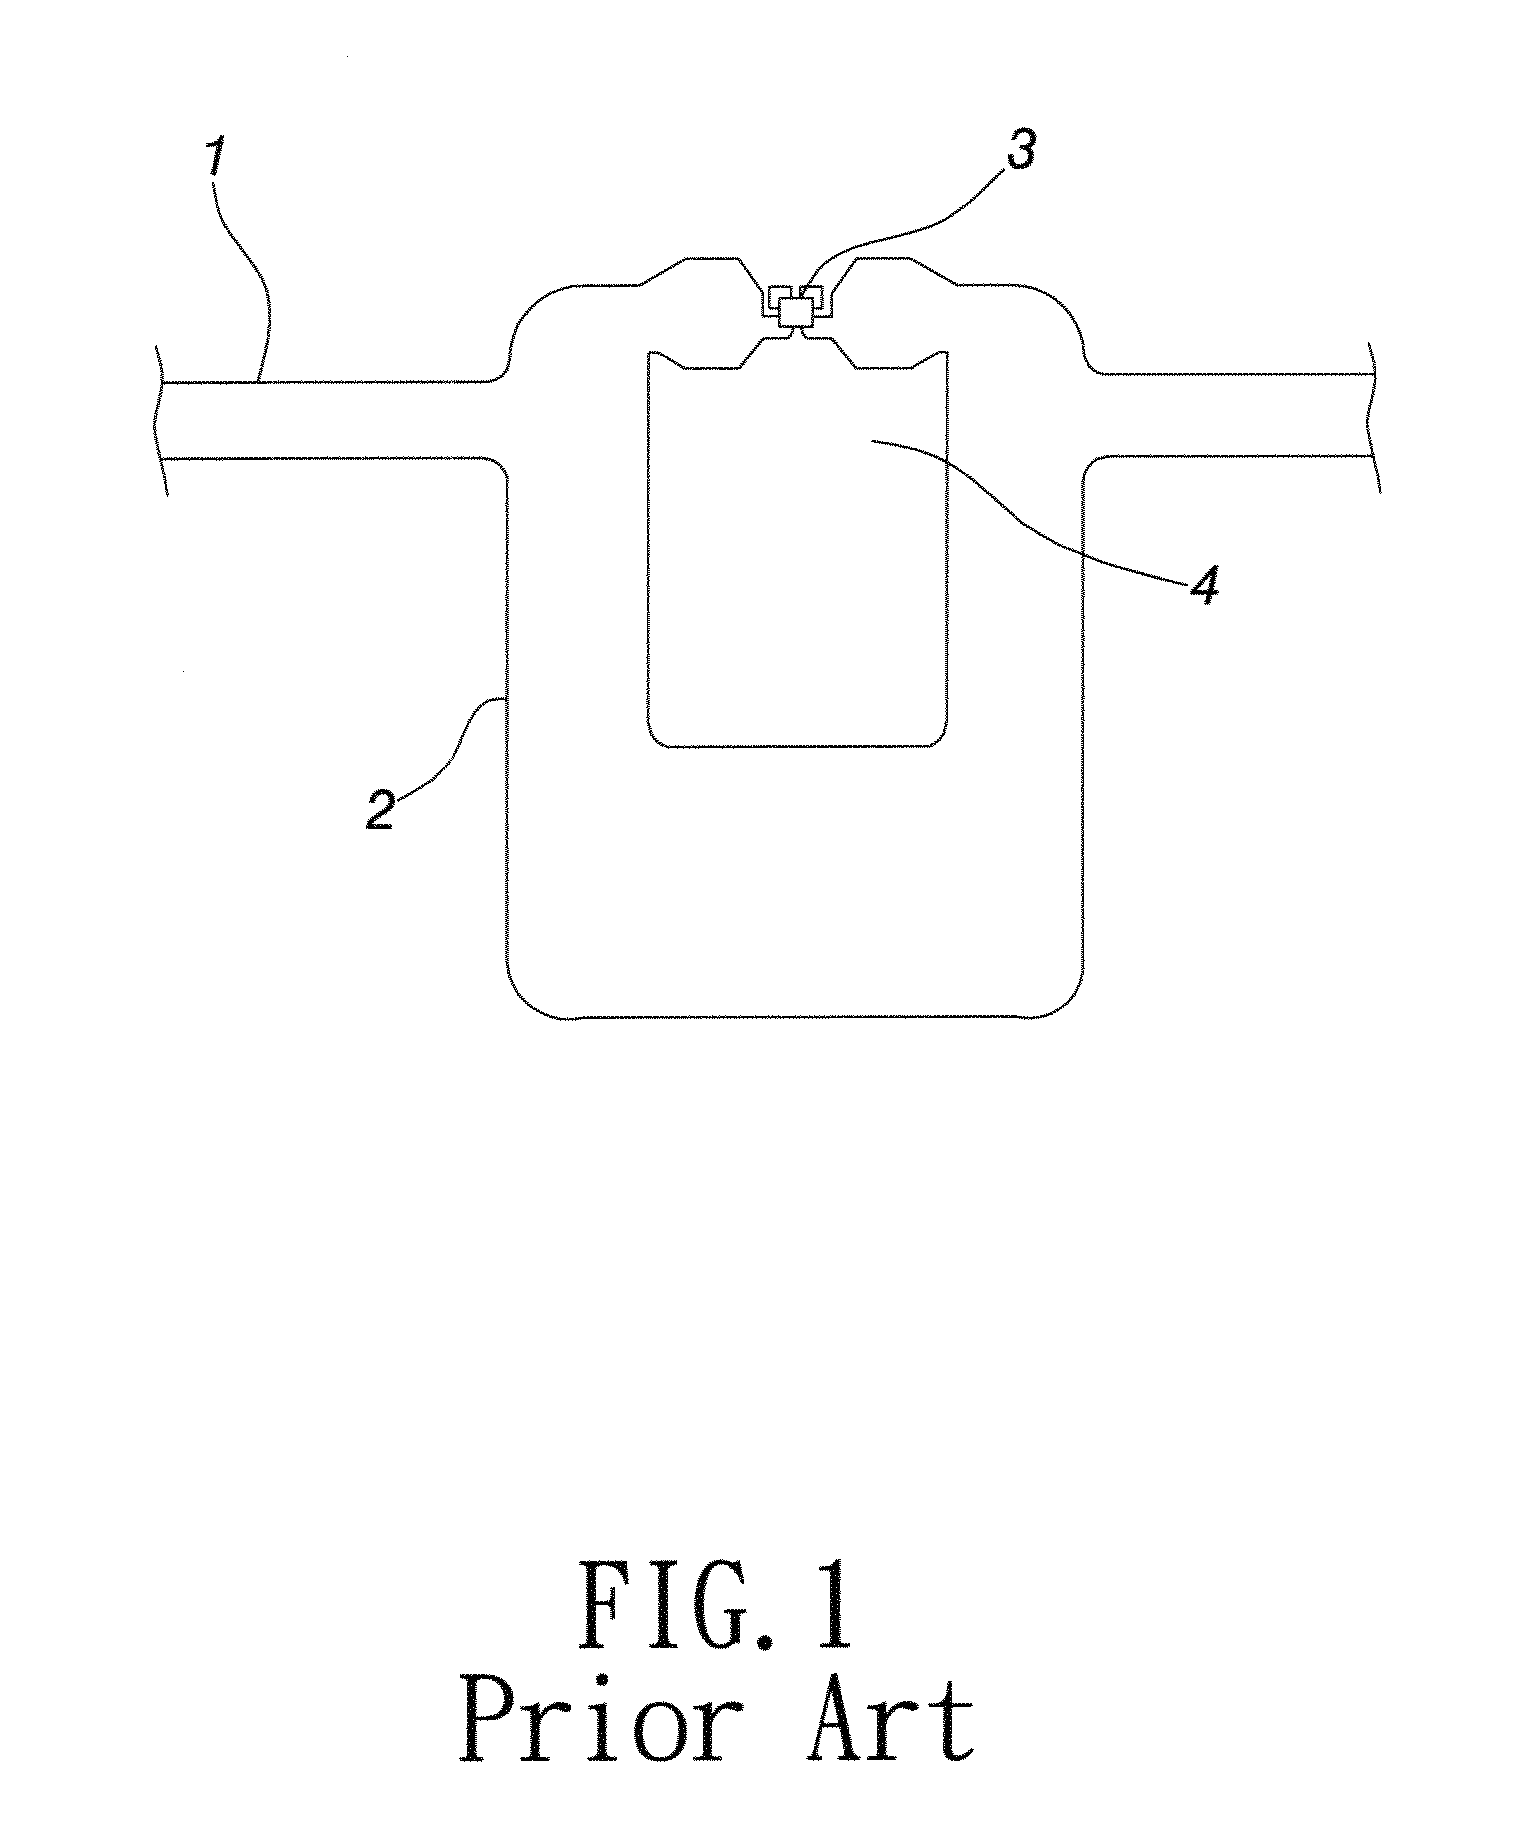 Antenna Structure of a Radio Frequency Identification System Transponder